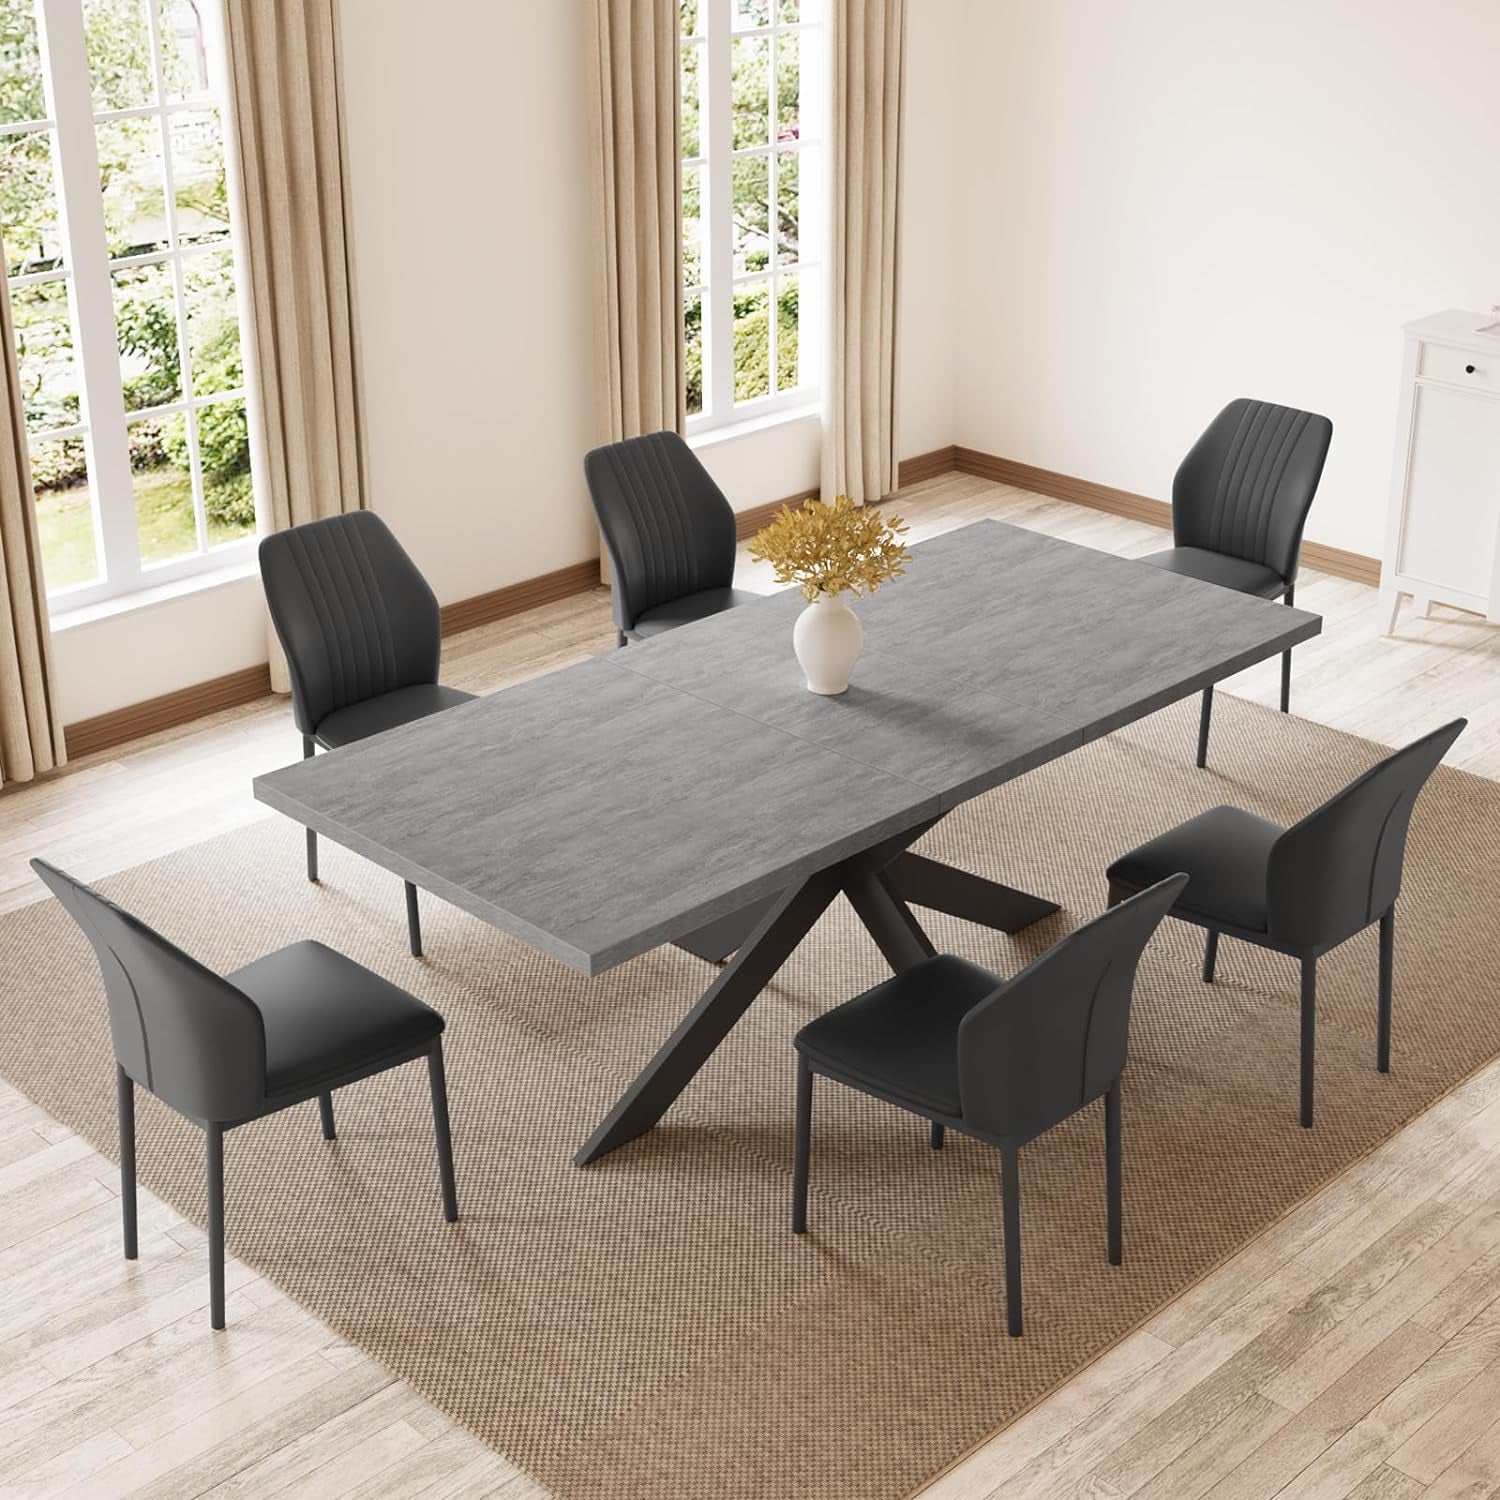 6-8 People Modern Dining Table Rectangular Kitchen Dining Table Space-Saving Expandable Dining Table Metal Frame Wood Dining Table and 6 Upholstered Chairs